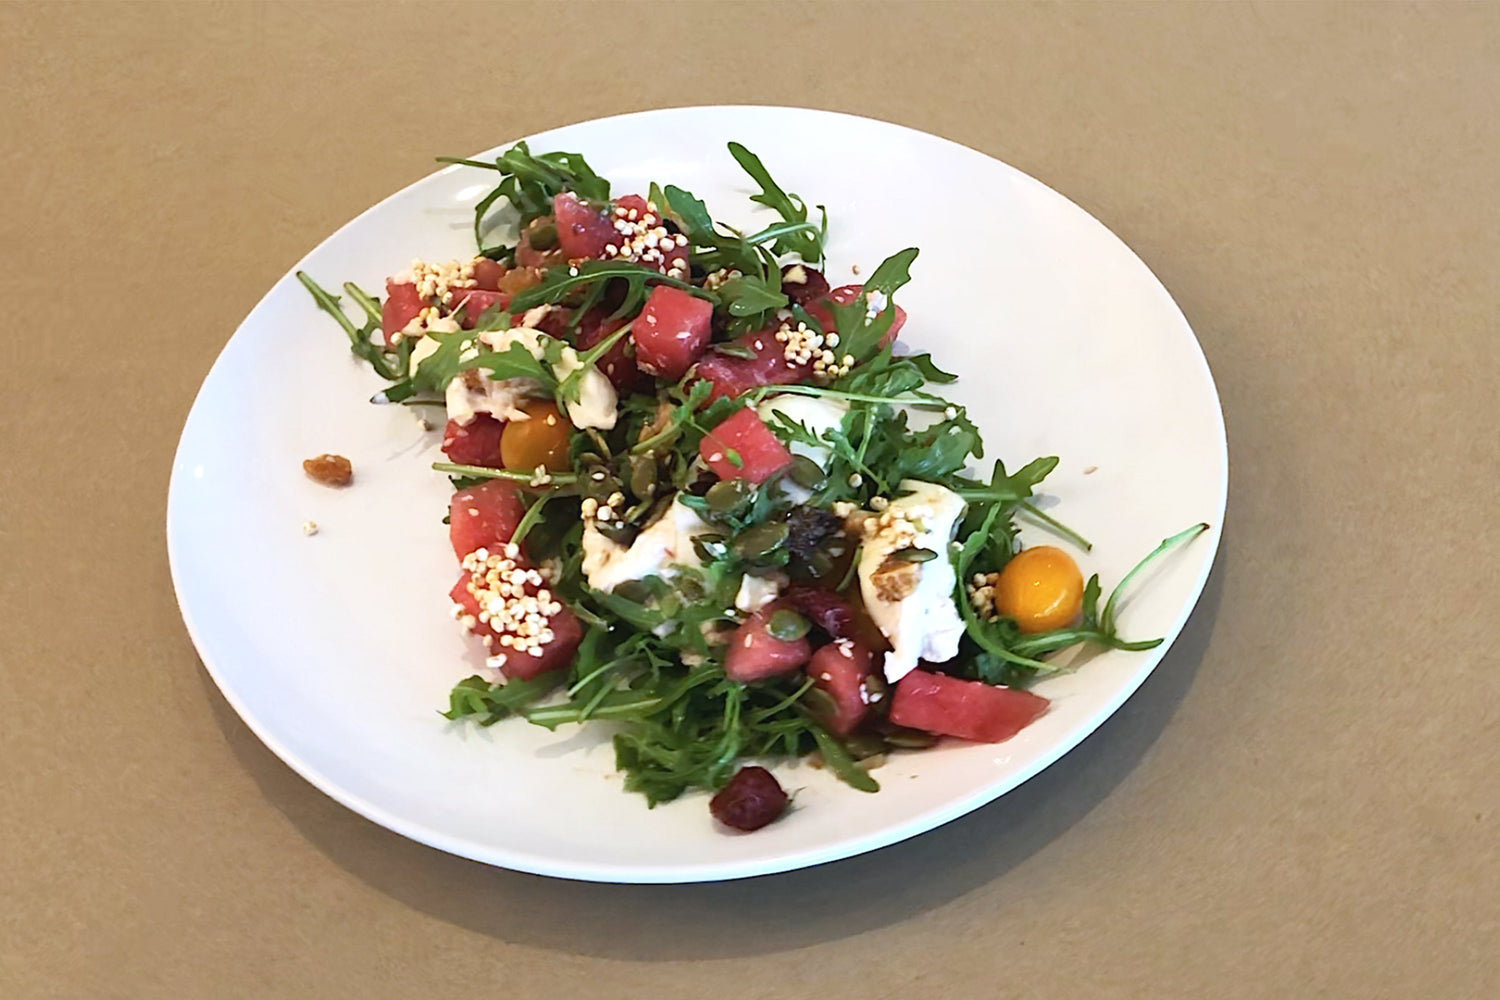 Holidays at Home: Watermelon, Rocket and Five Seed Salad